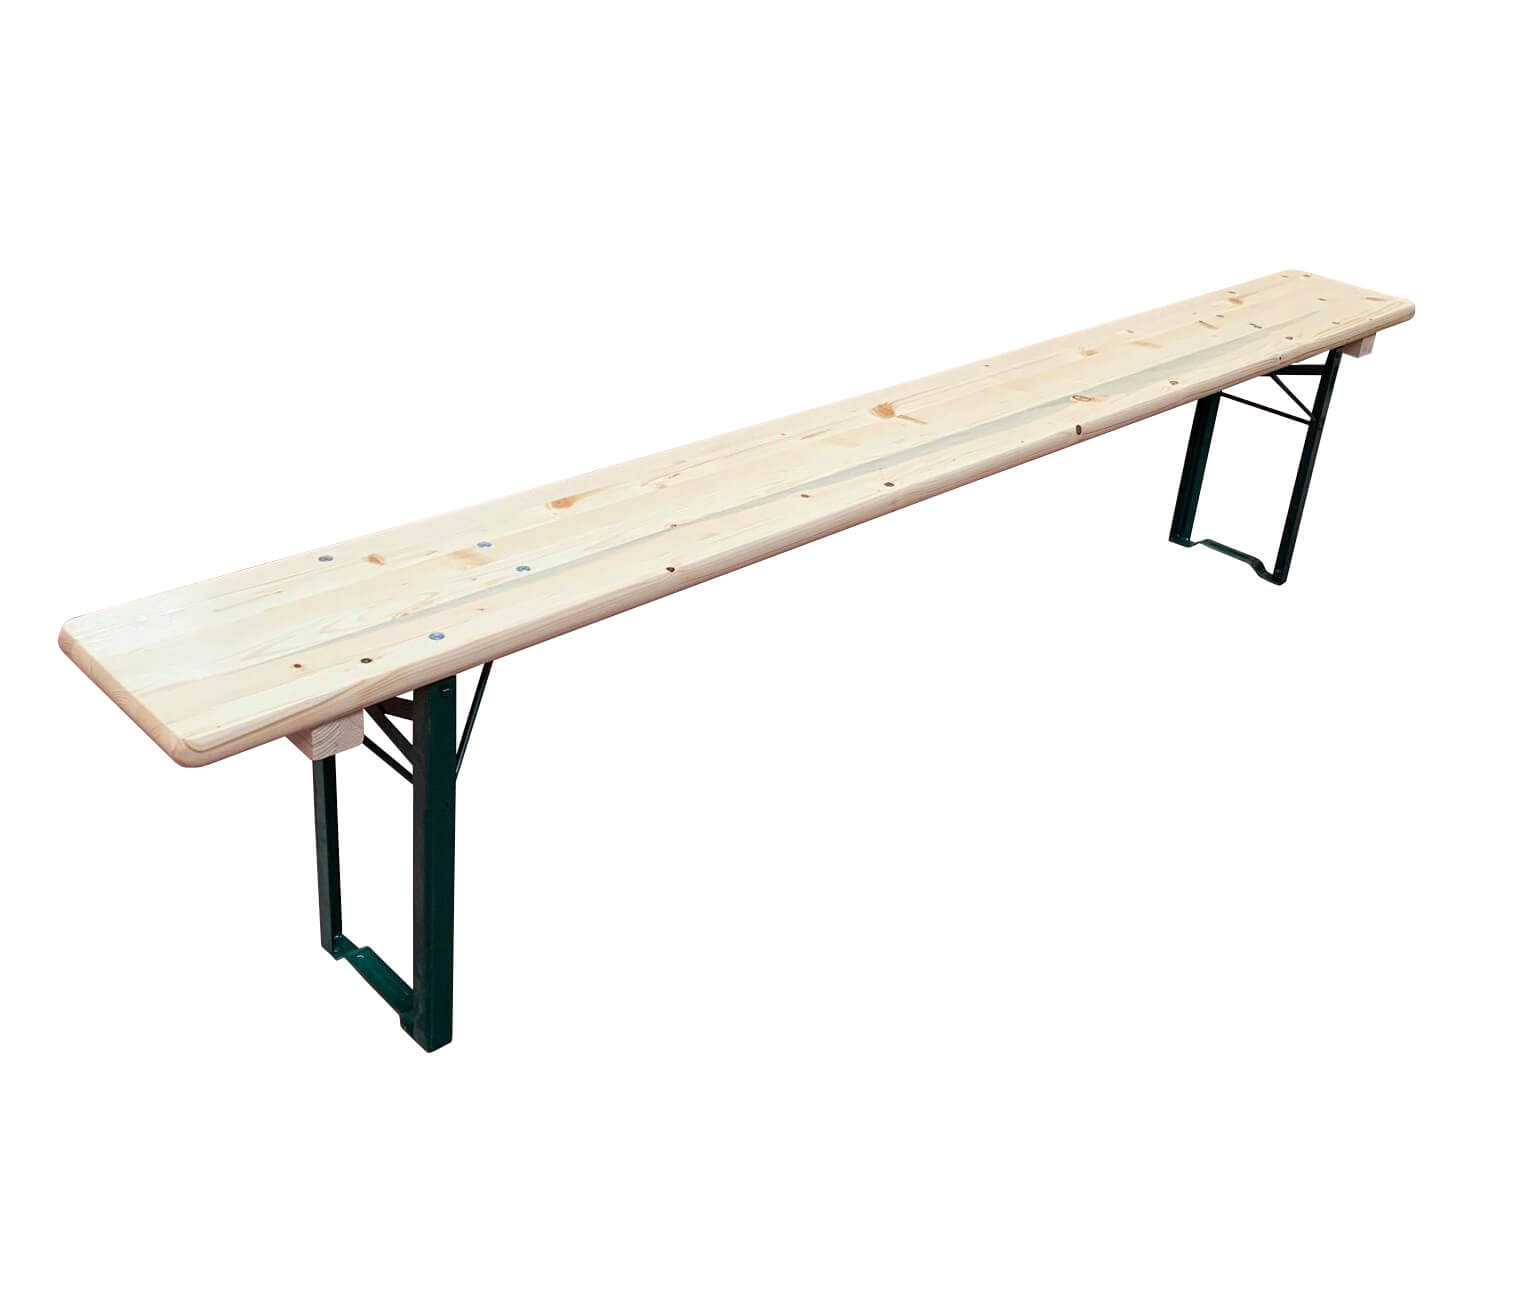 Beer set bench / 4-5 people (table sold separately)